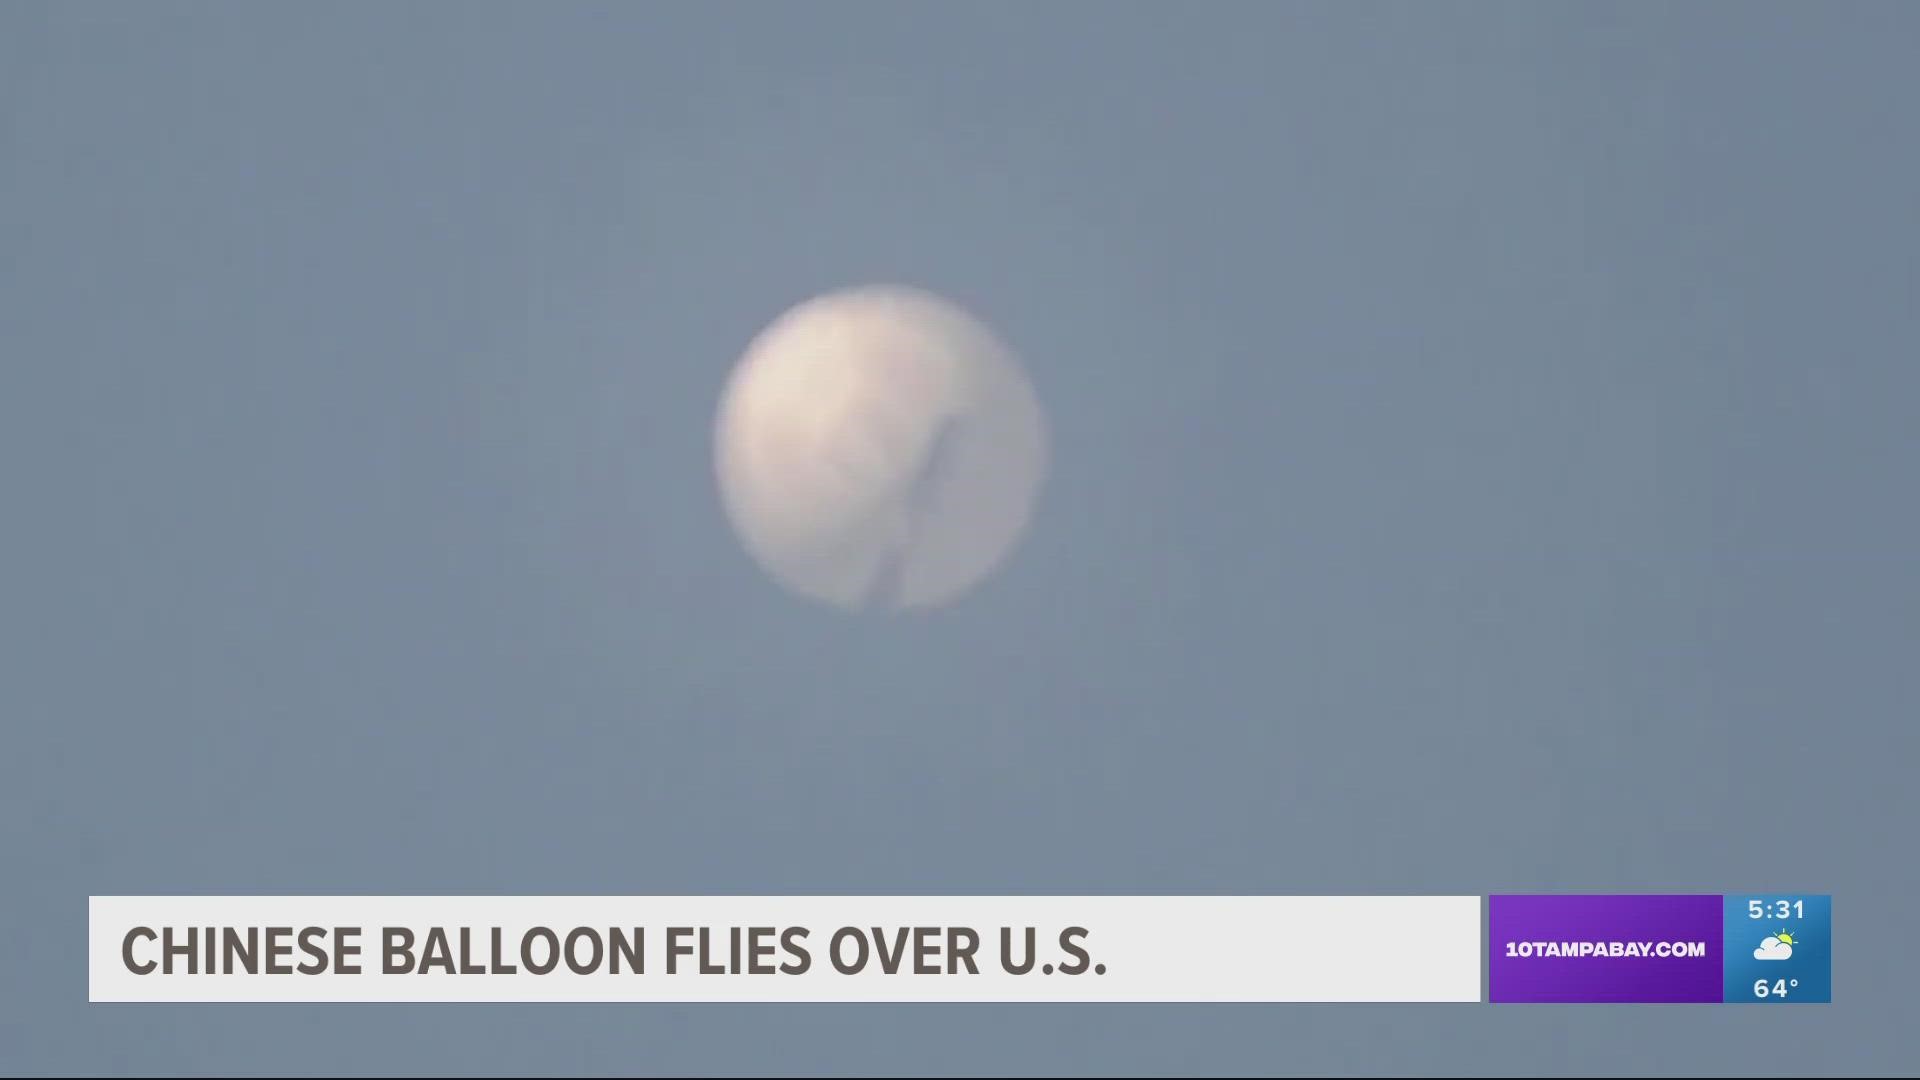 China claims that the balloon is a weather research “airship” that had blown off course. The U.S. has described it as a surveillance vehicle.